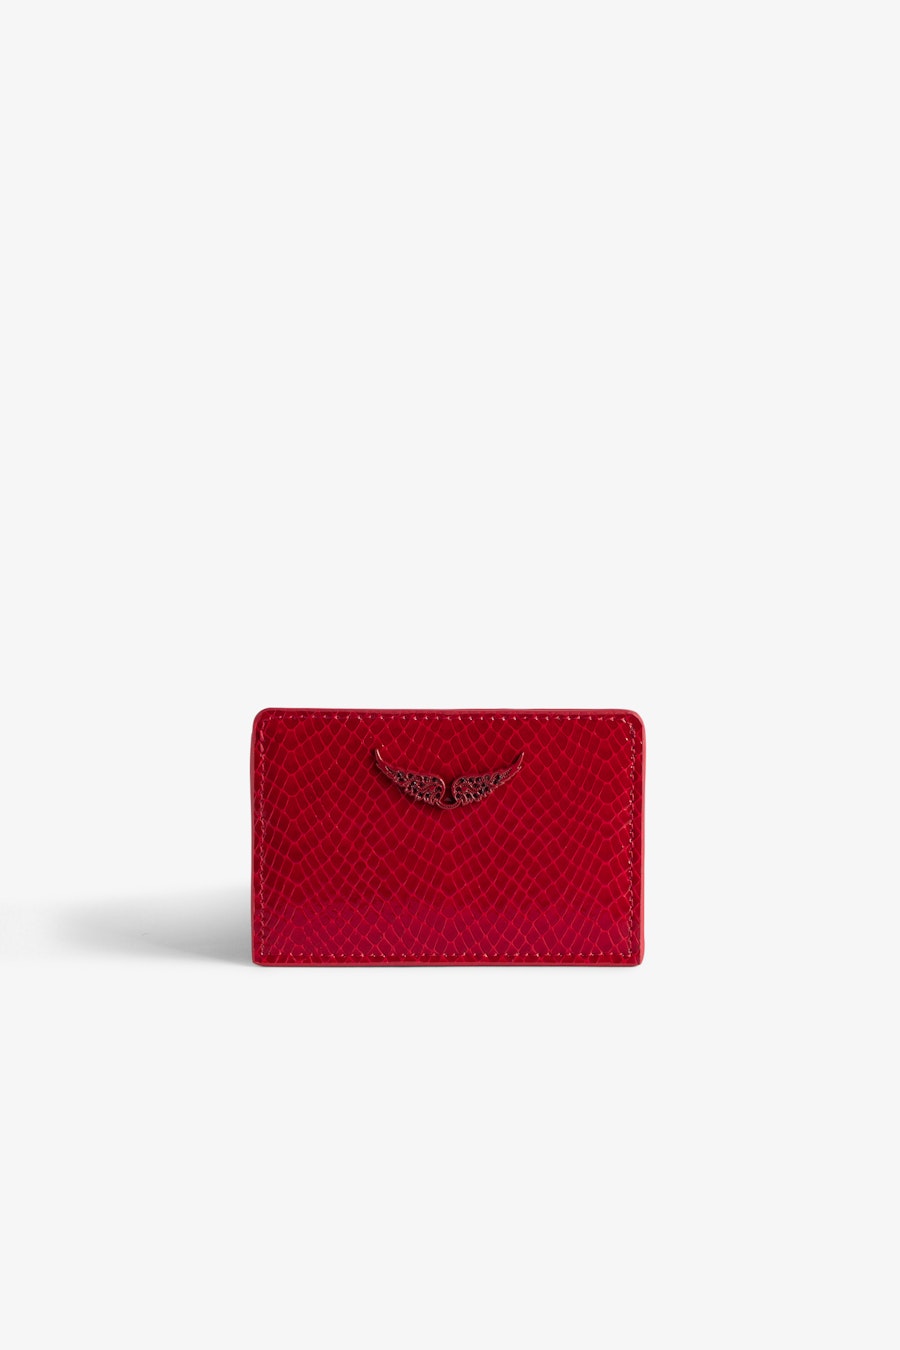 ZADIG&VOLTAIRE ZV Pass Embossed Card Holder